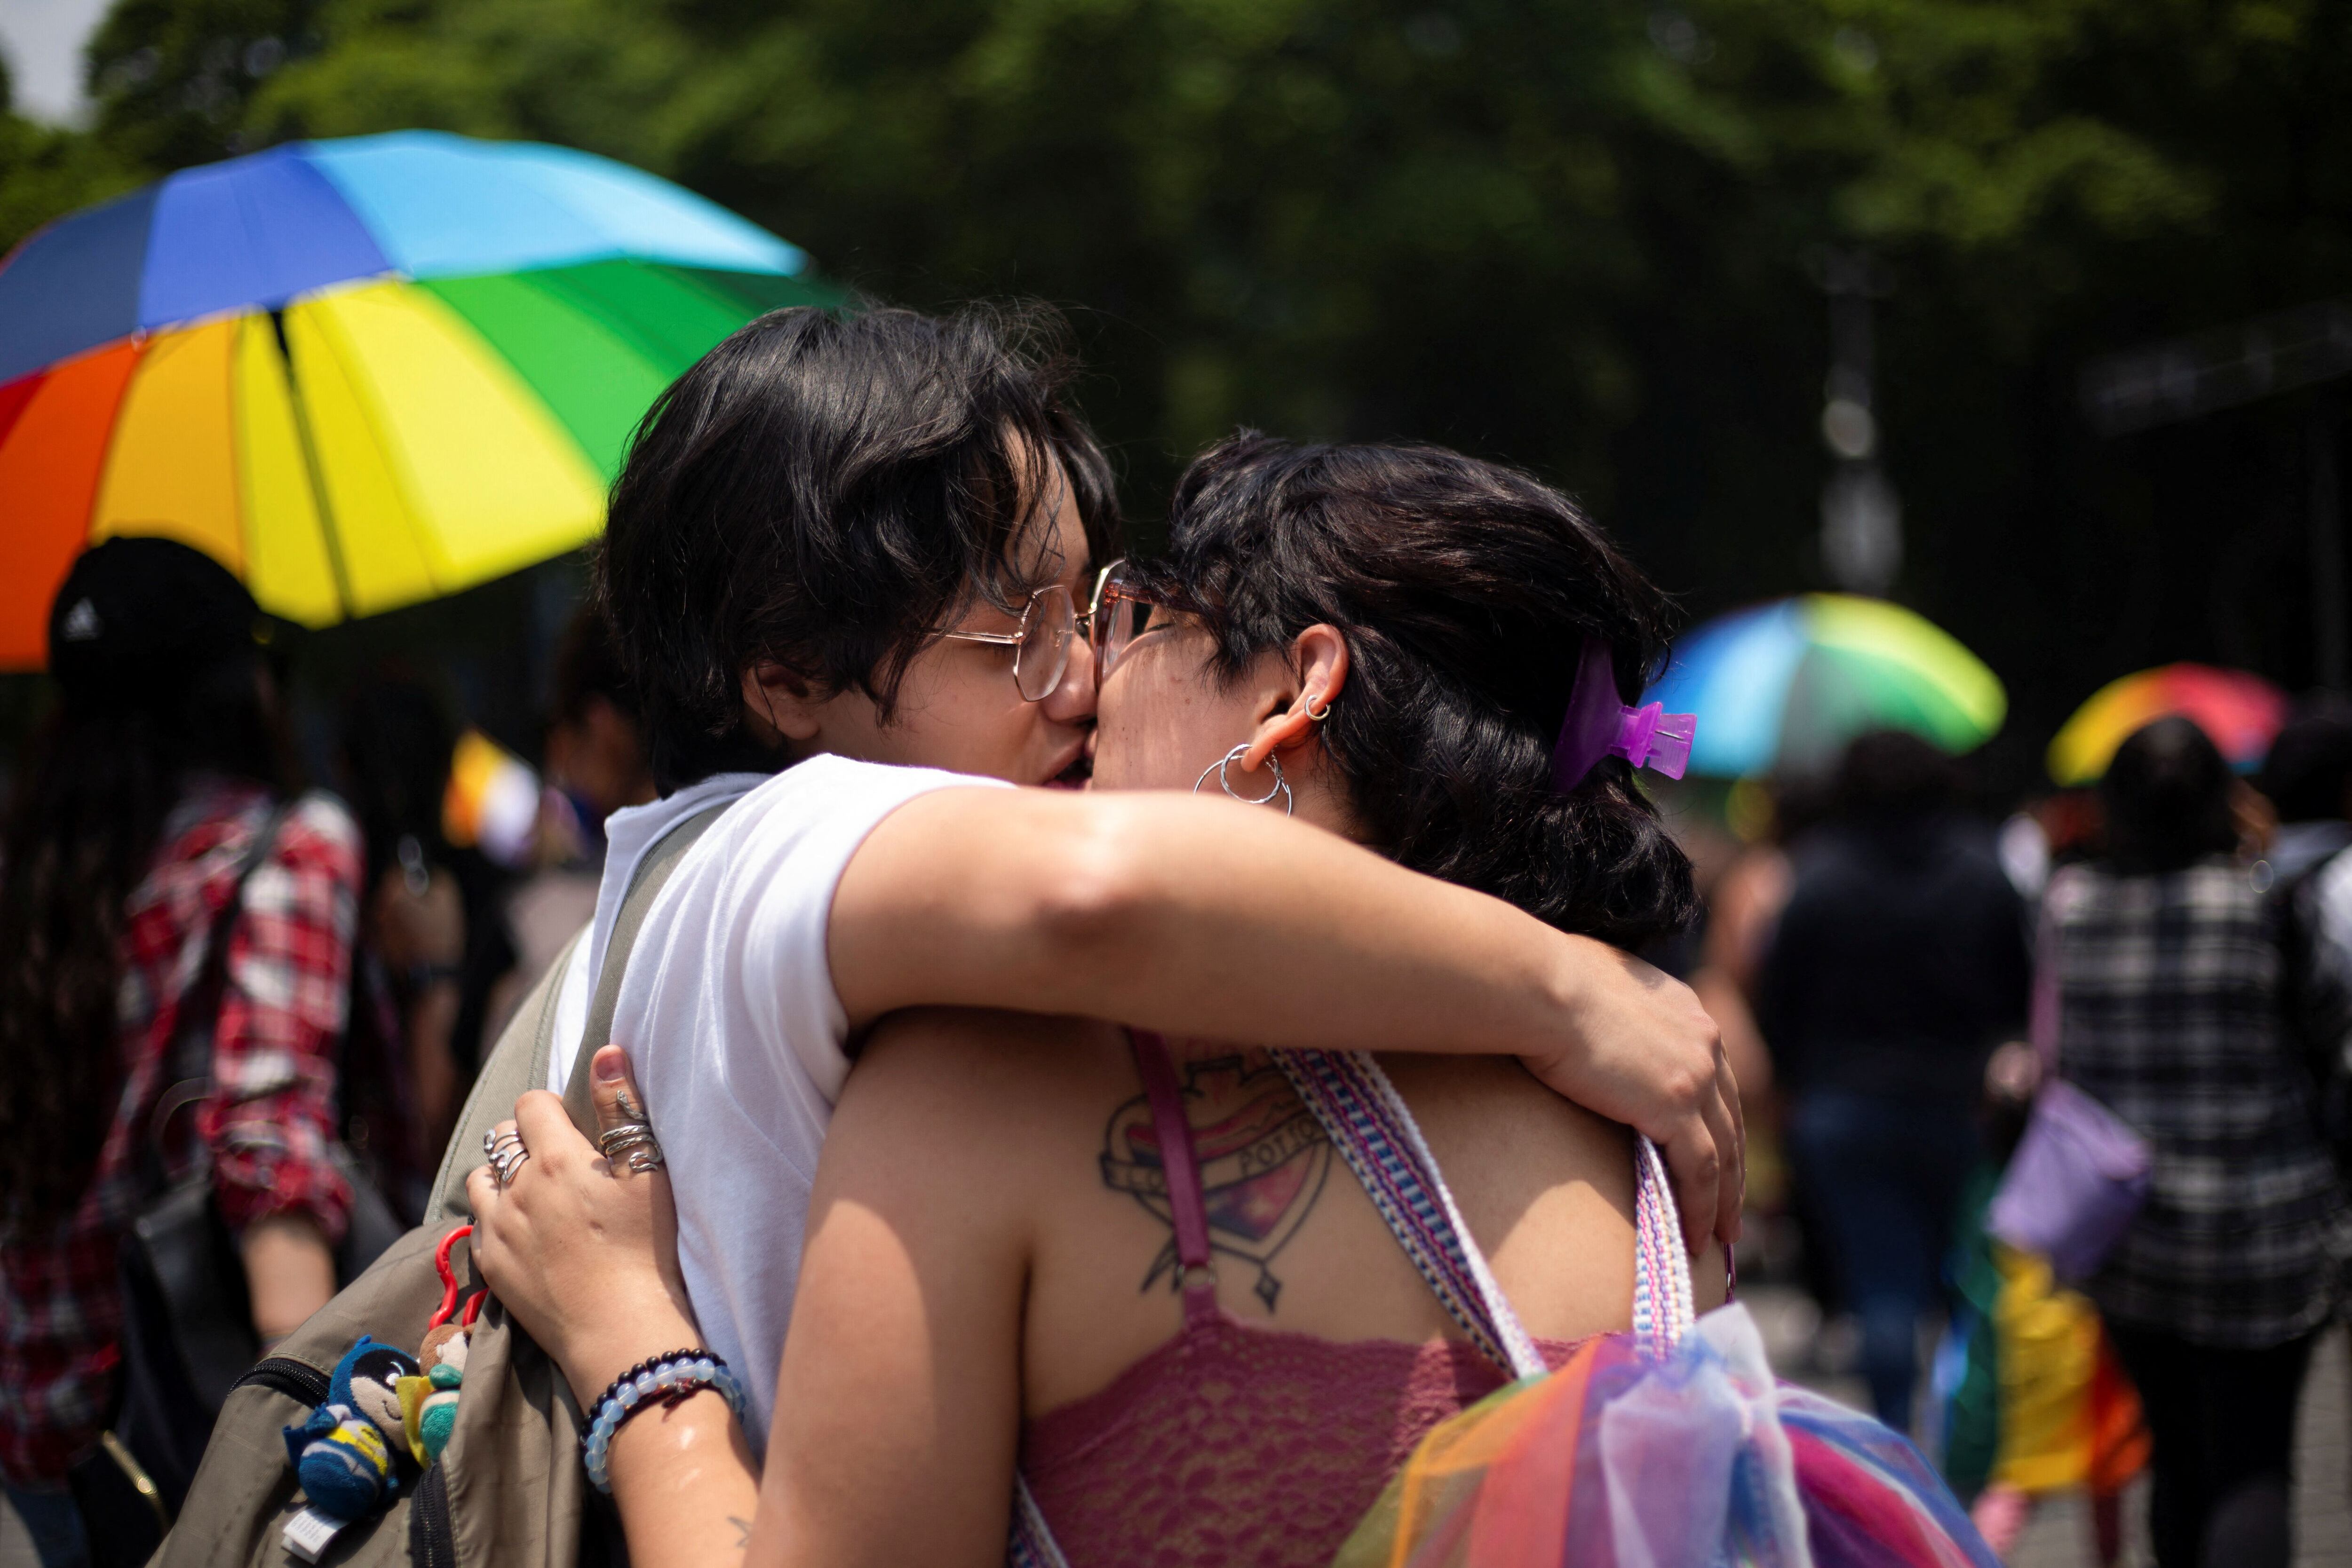 Demonstrators kiss each other during an LGBT protest named "Marcha Lencha 2022" against gender violence and to demand respect for their human rights, in Mexico City, Mexico June 18, 2022. REUTERS/Quetzalli Nicte-Ha